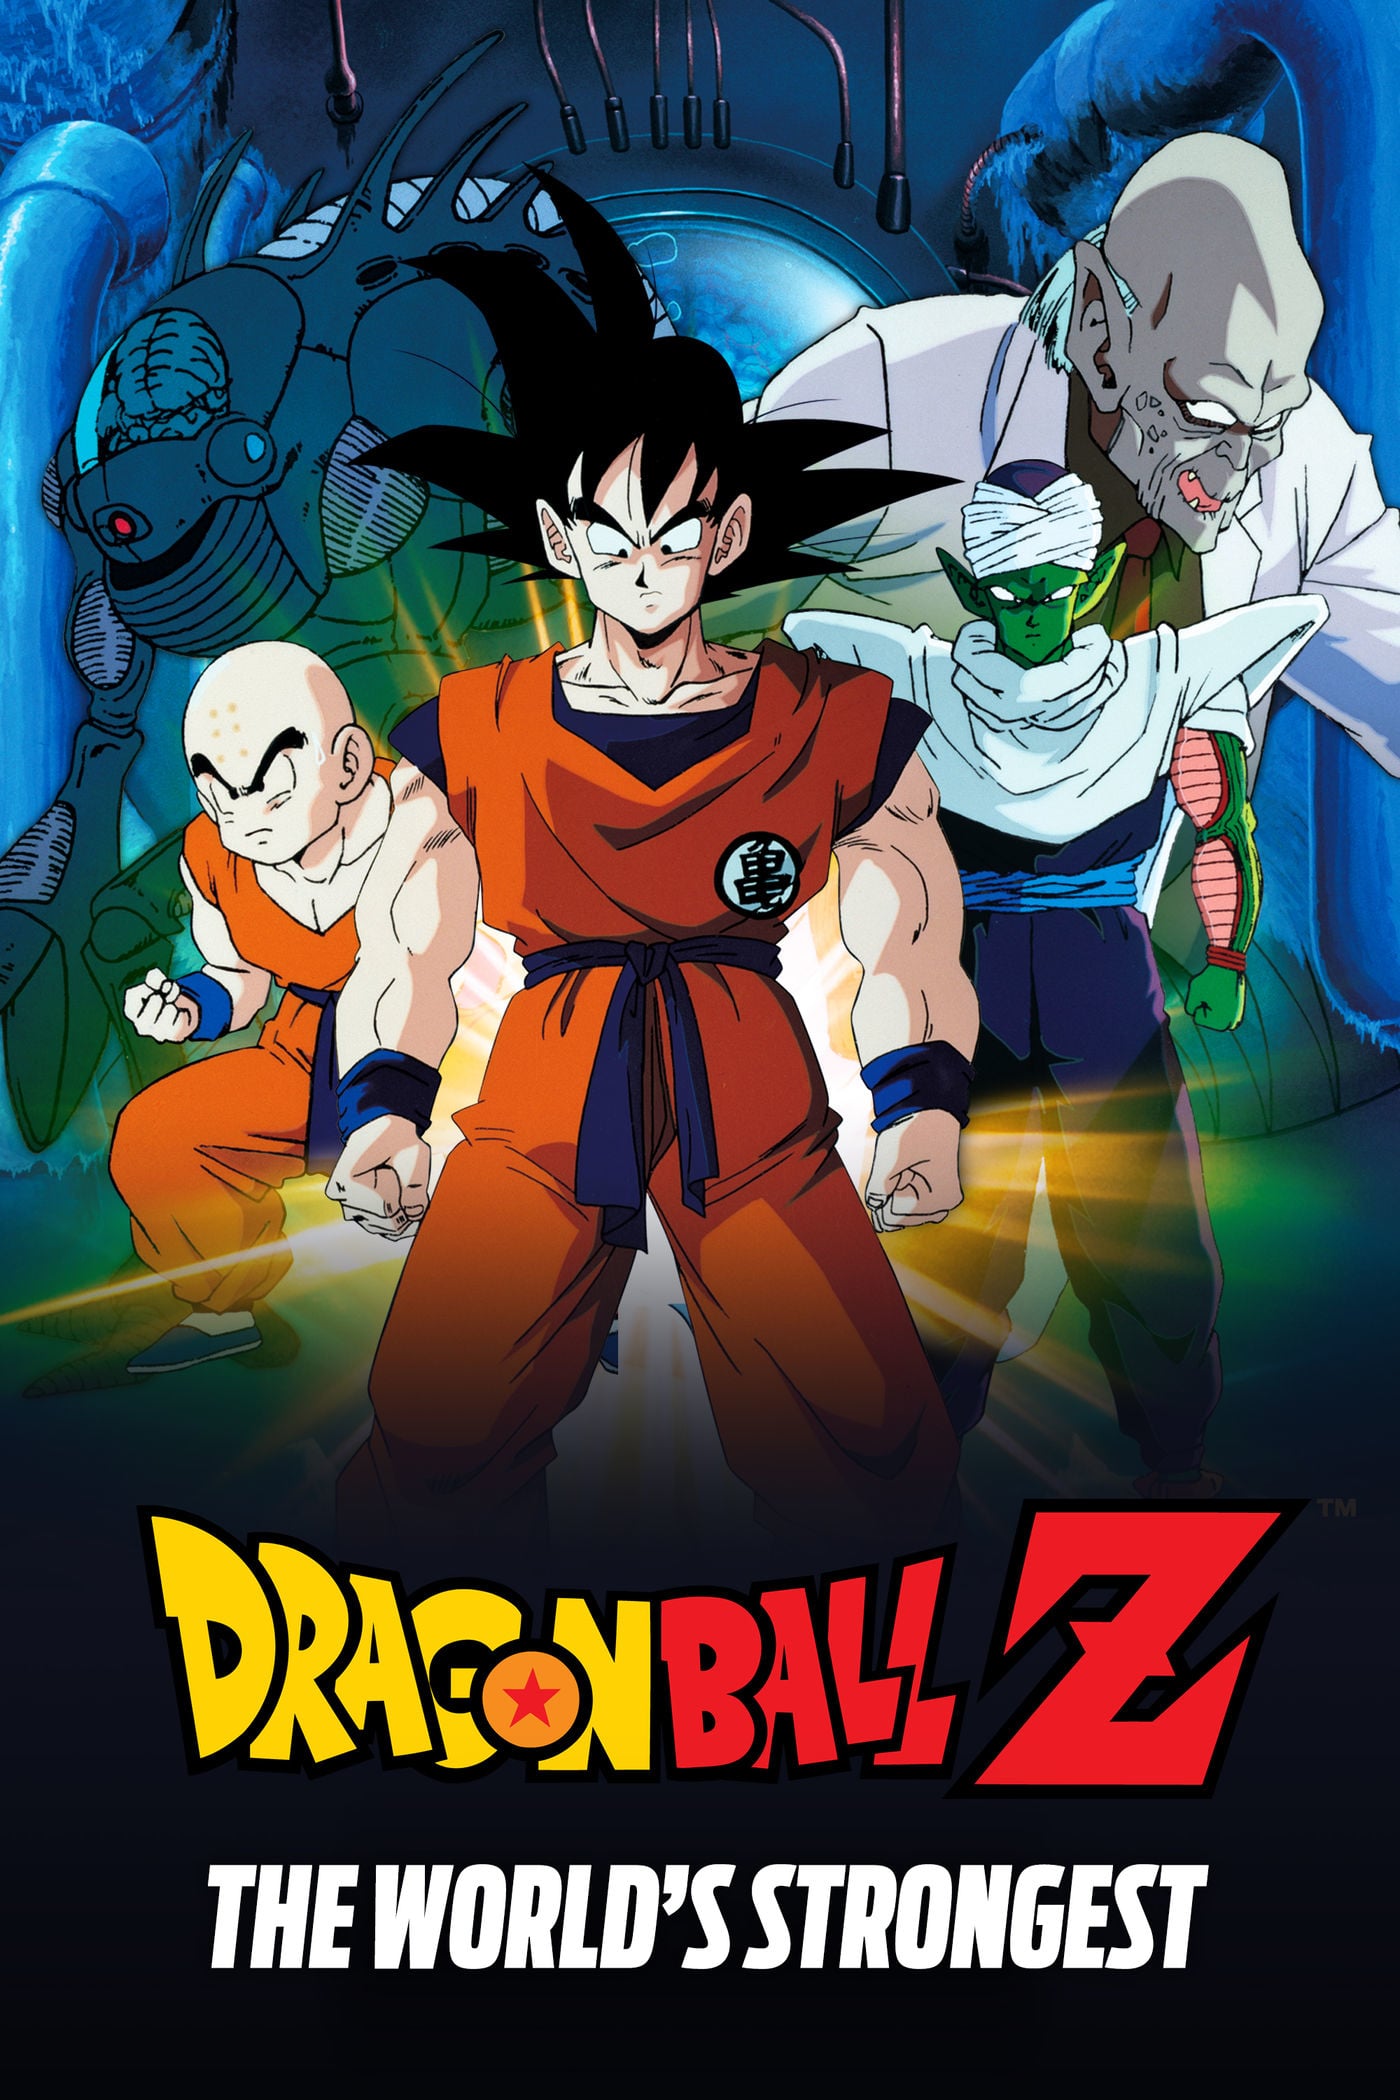 Dragon Ball Z Movie 2: The World’s Strongest